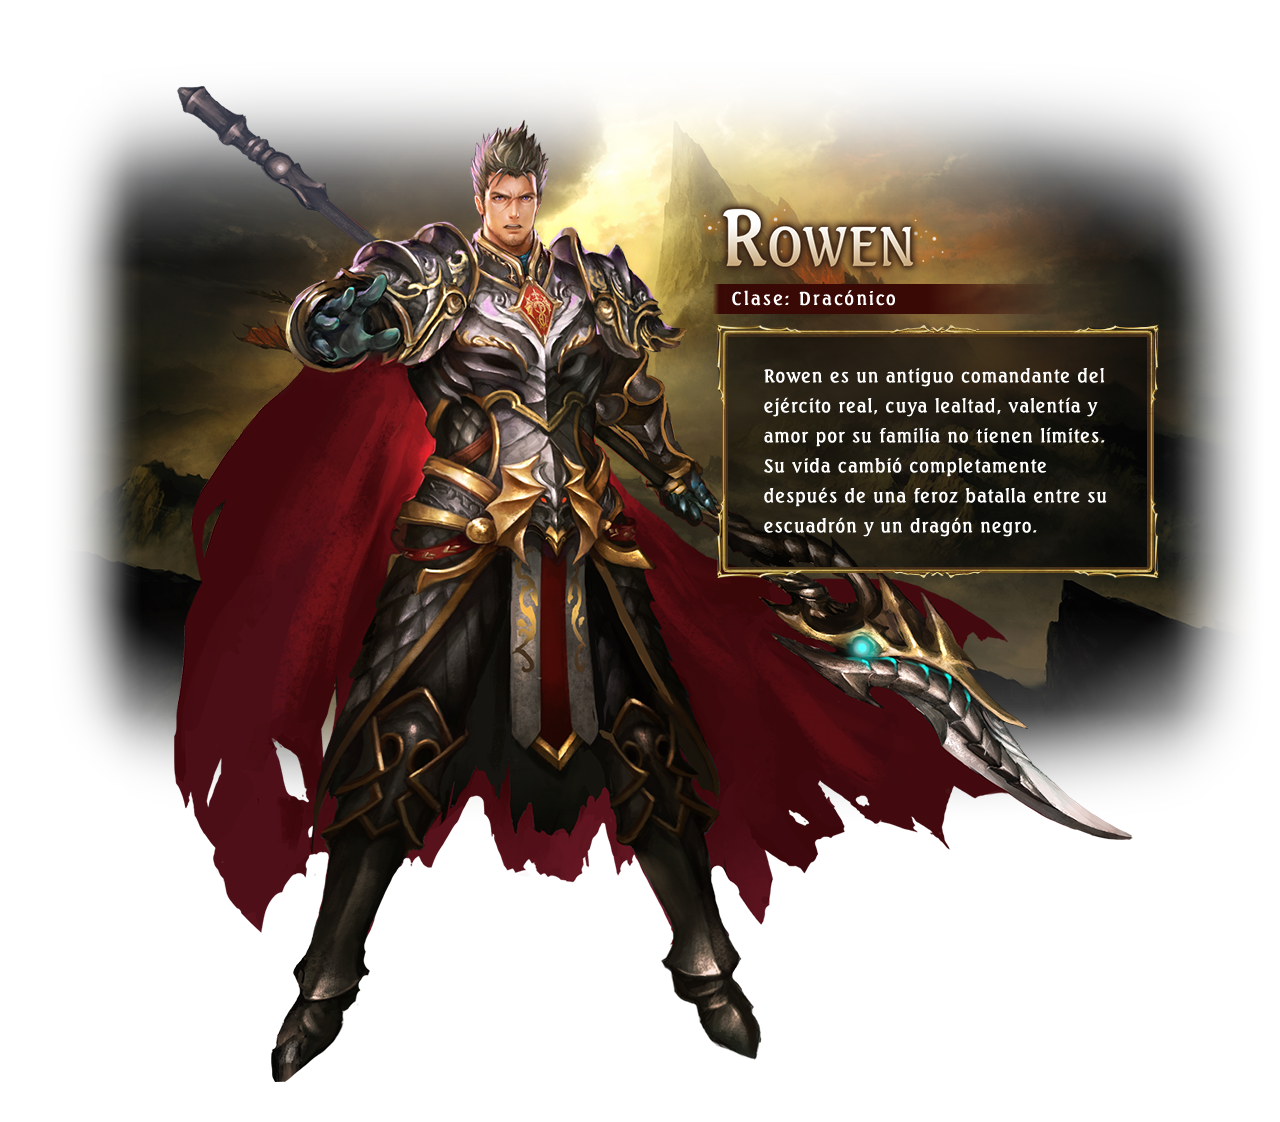 Rowen / Class: Dragoncraft / Rowen is a former commander in the royal army. His life changed when a ferocious dragon attacked his squad. He is now trying to come to terms with the consequences.